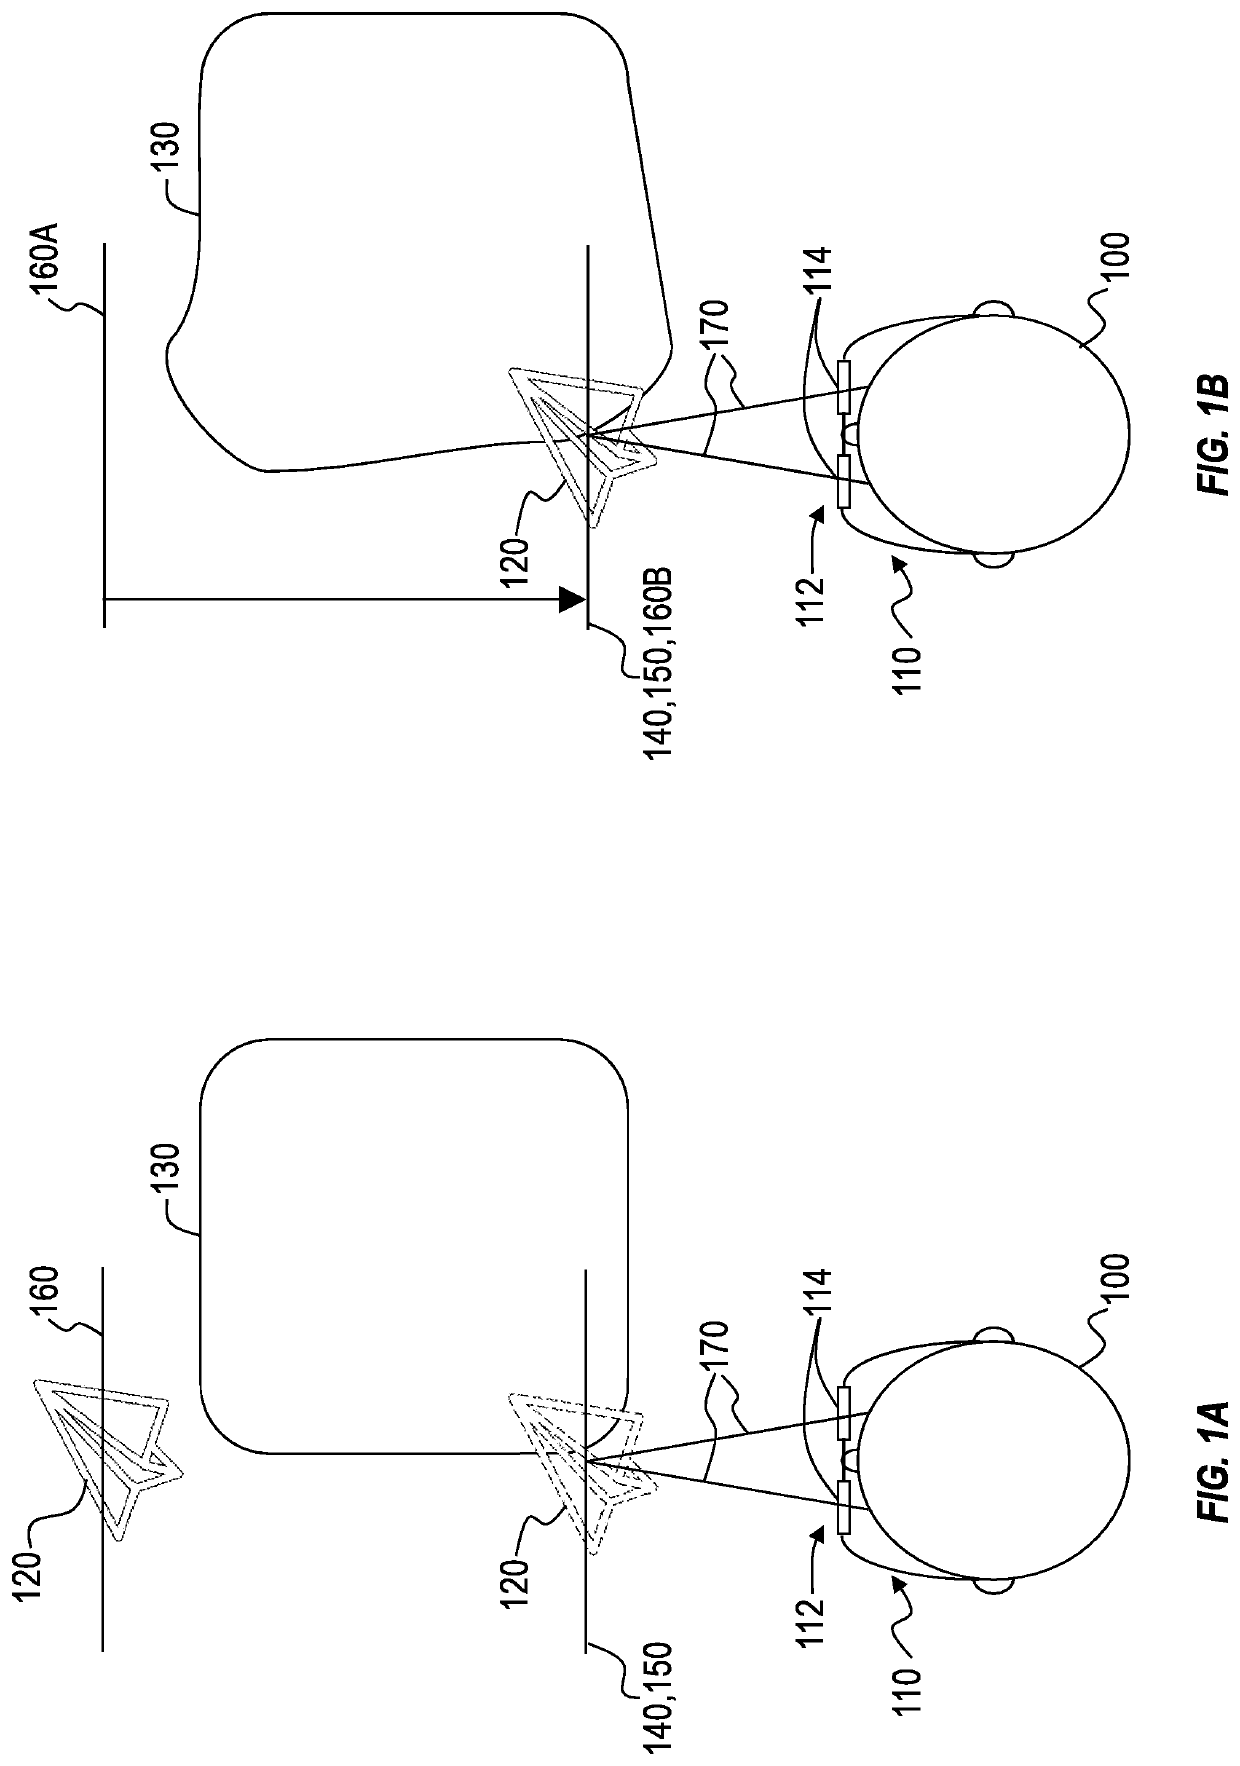 Automated variable-focus lens control to reduce user discomfort in a head-mounted display